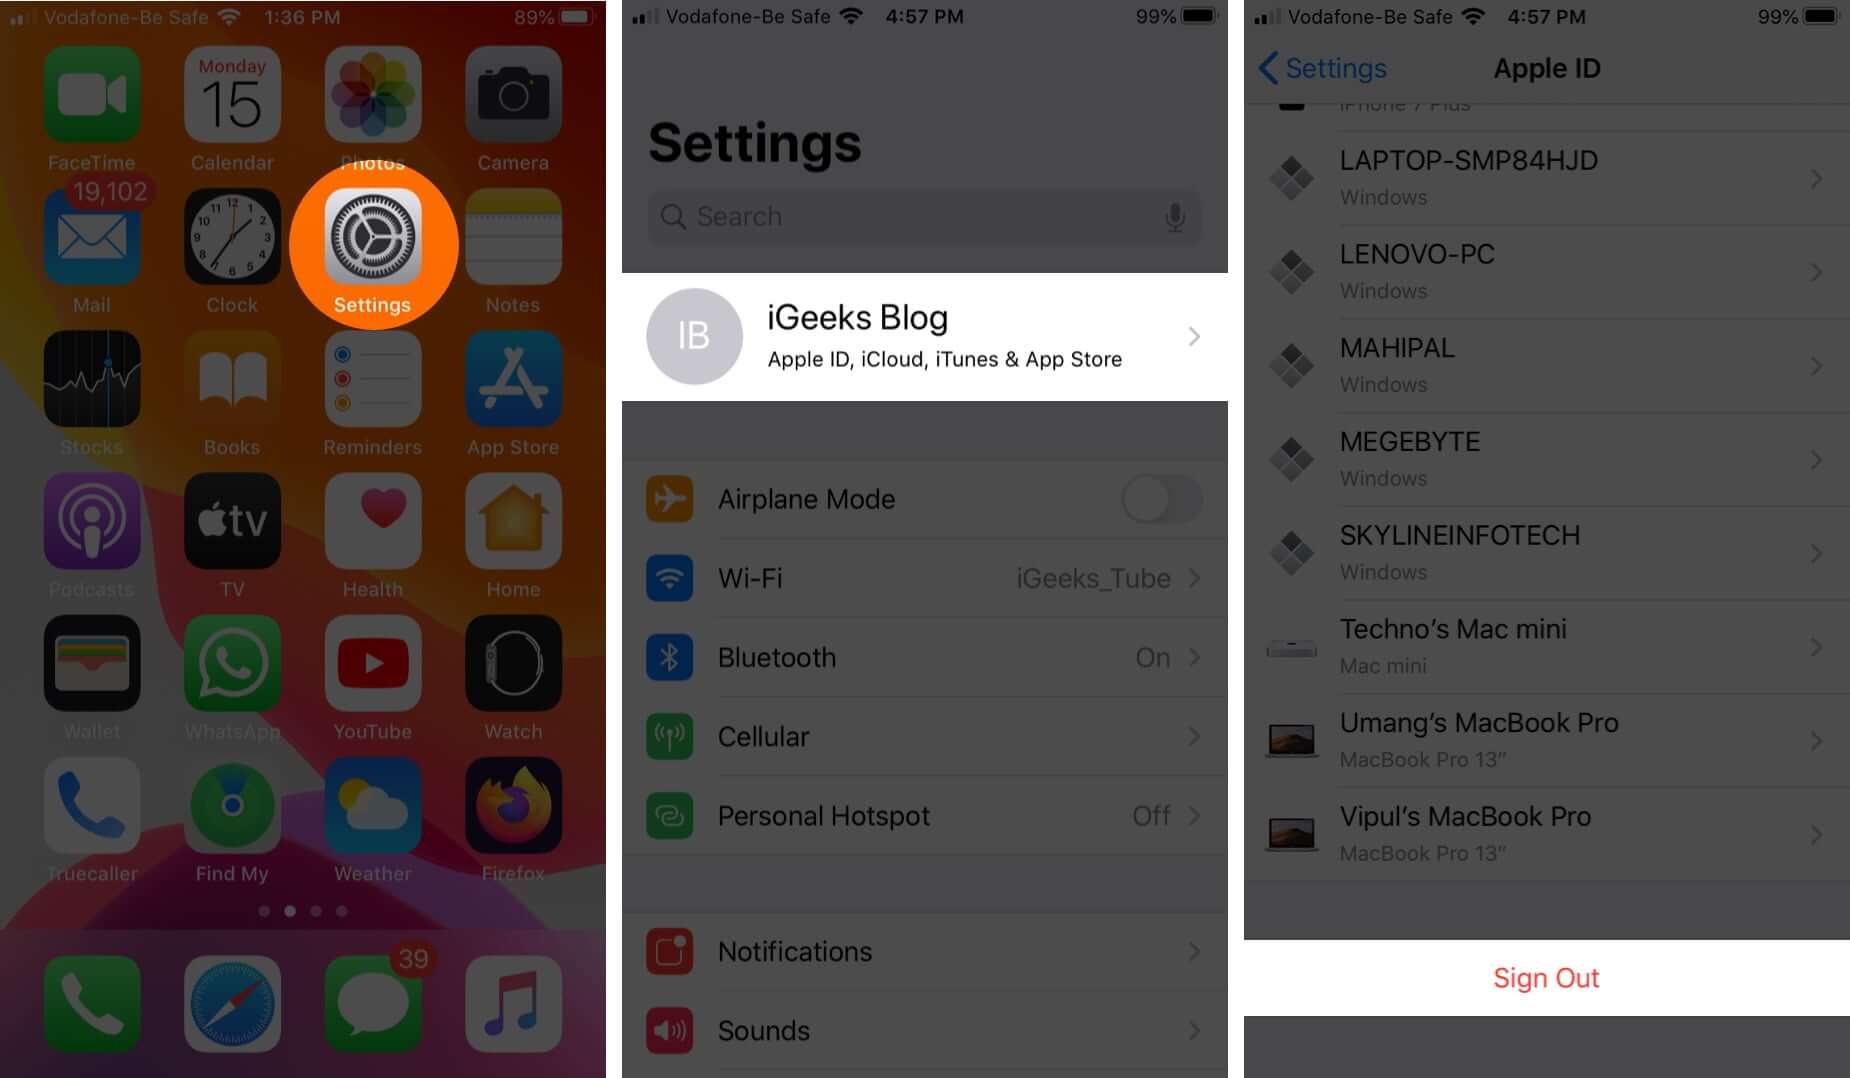 open settings tap on apple id and tap on sign out